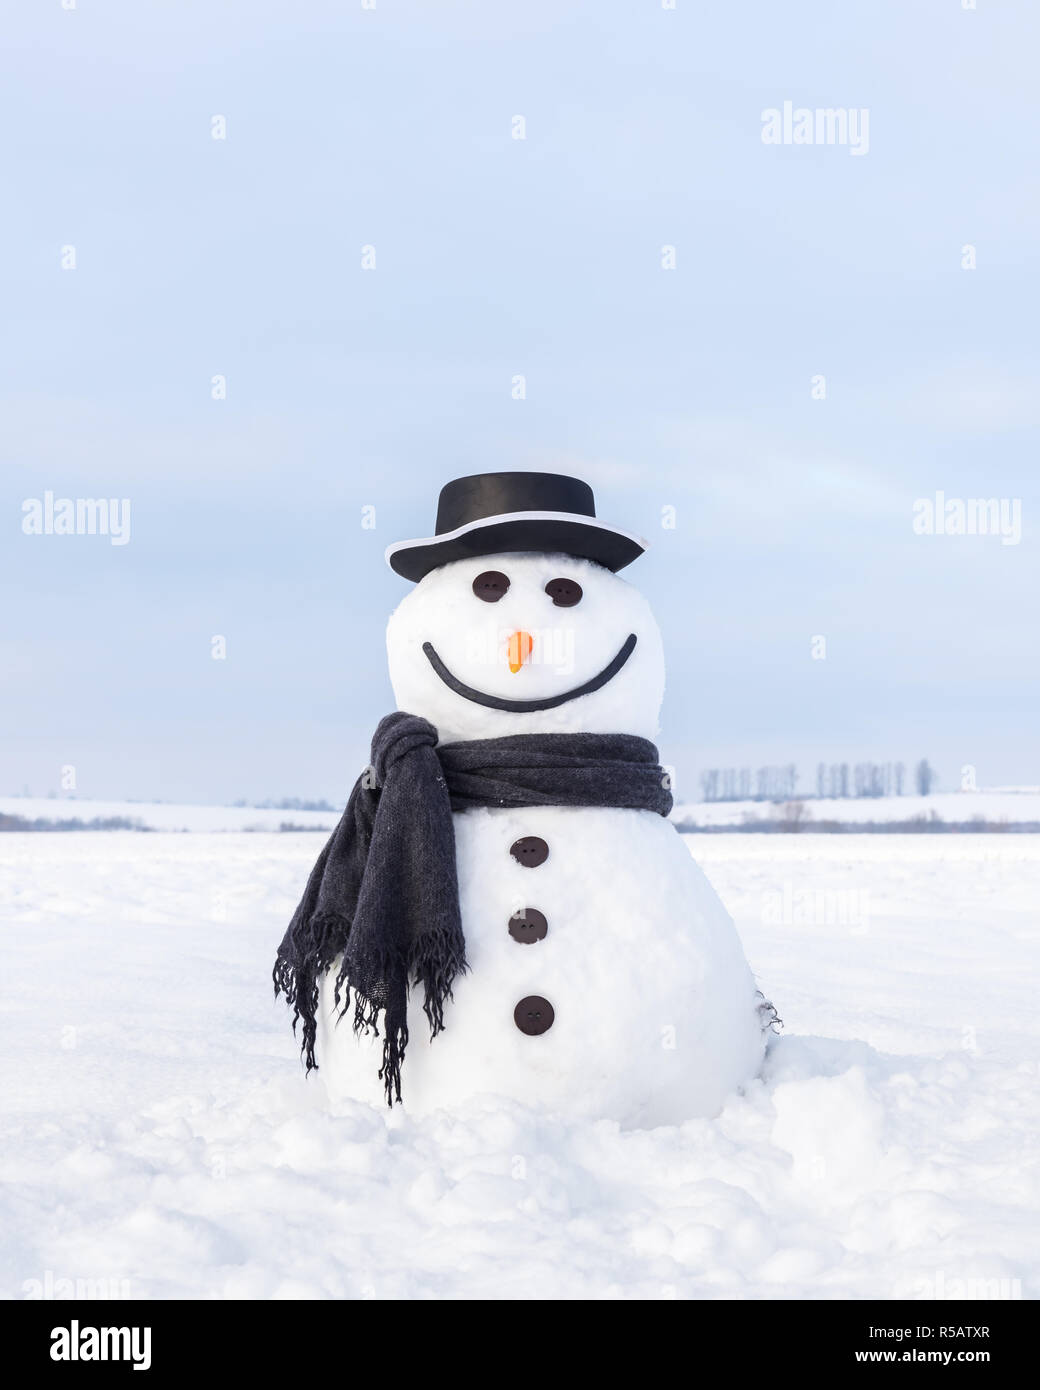 Funny snowman in stylish hat and black scalf on snowy field. Merry Christmass and happy New Year! Stock Photo